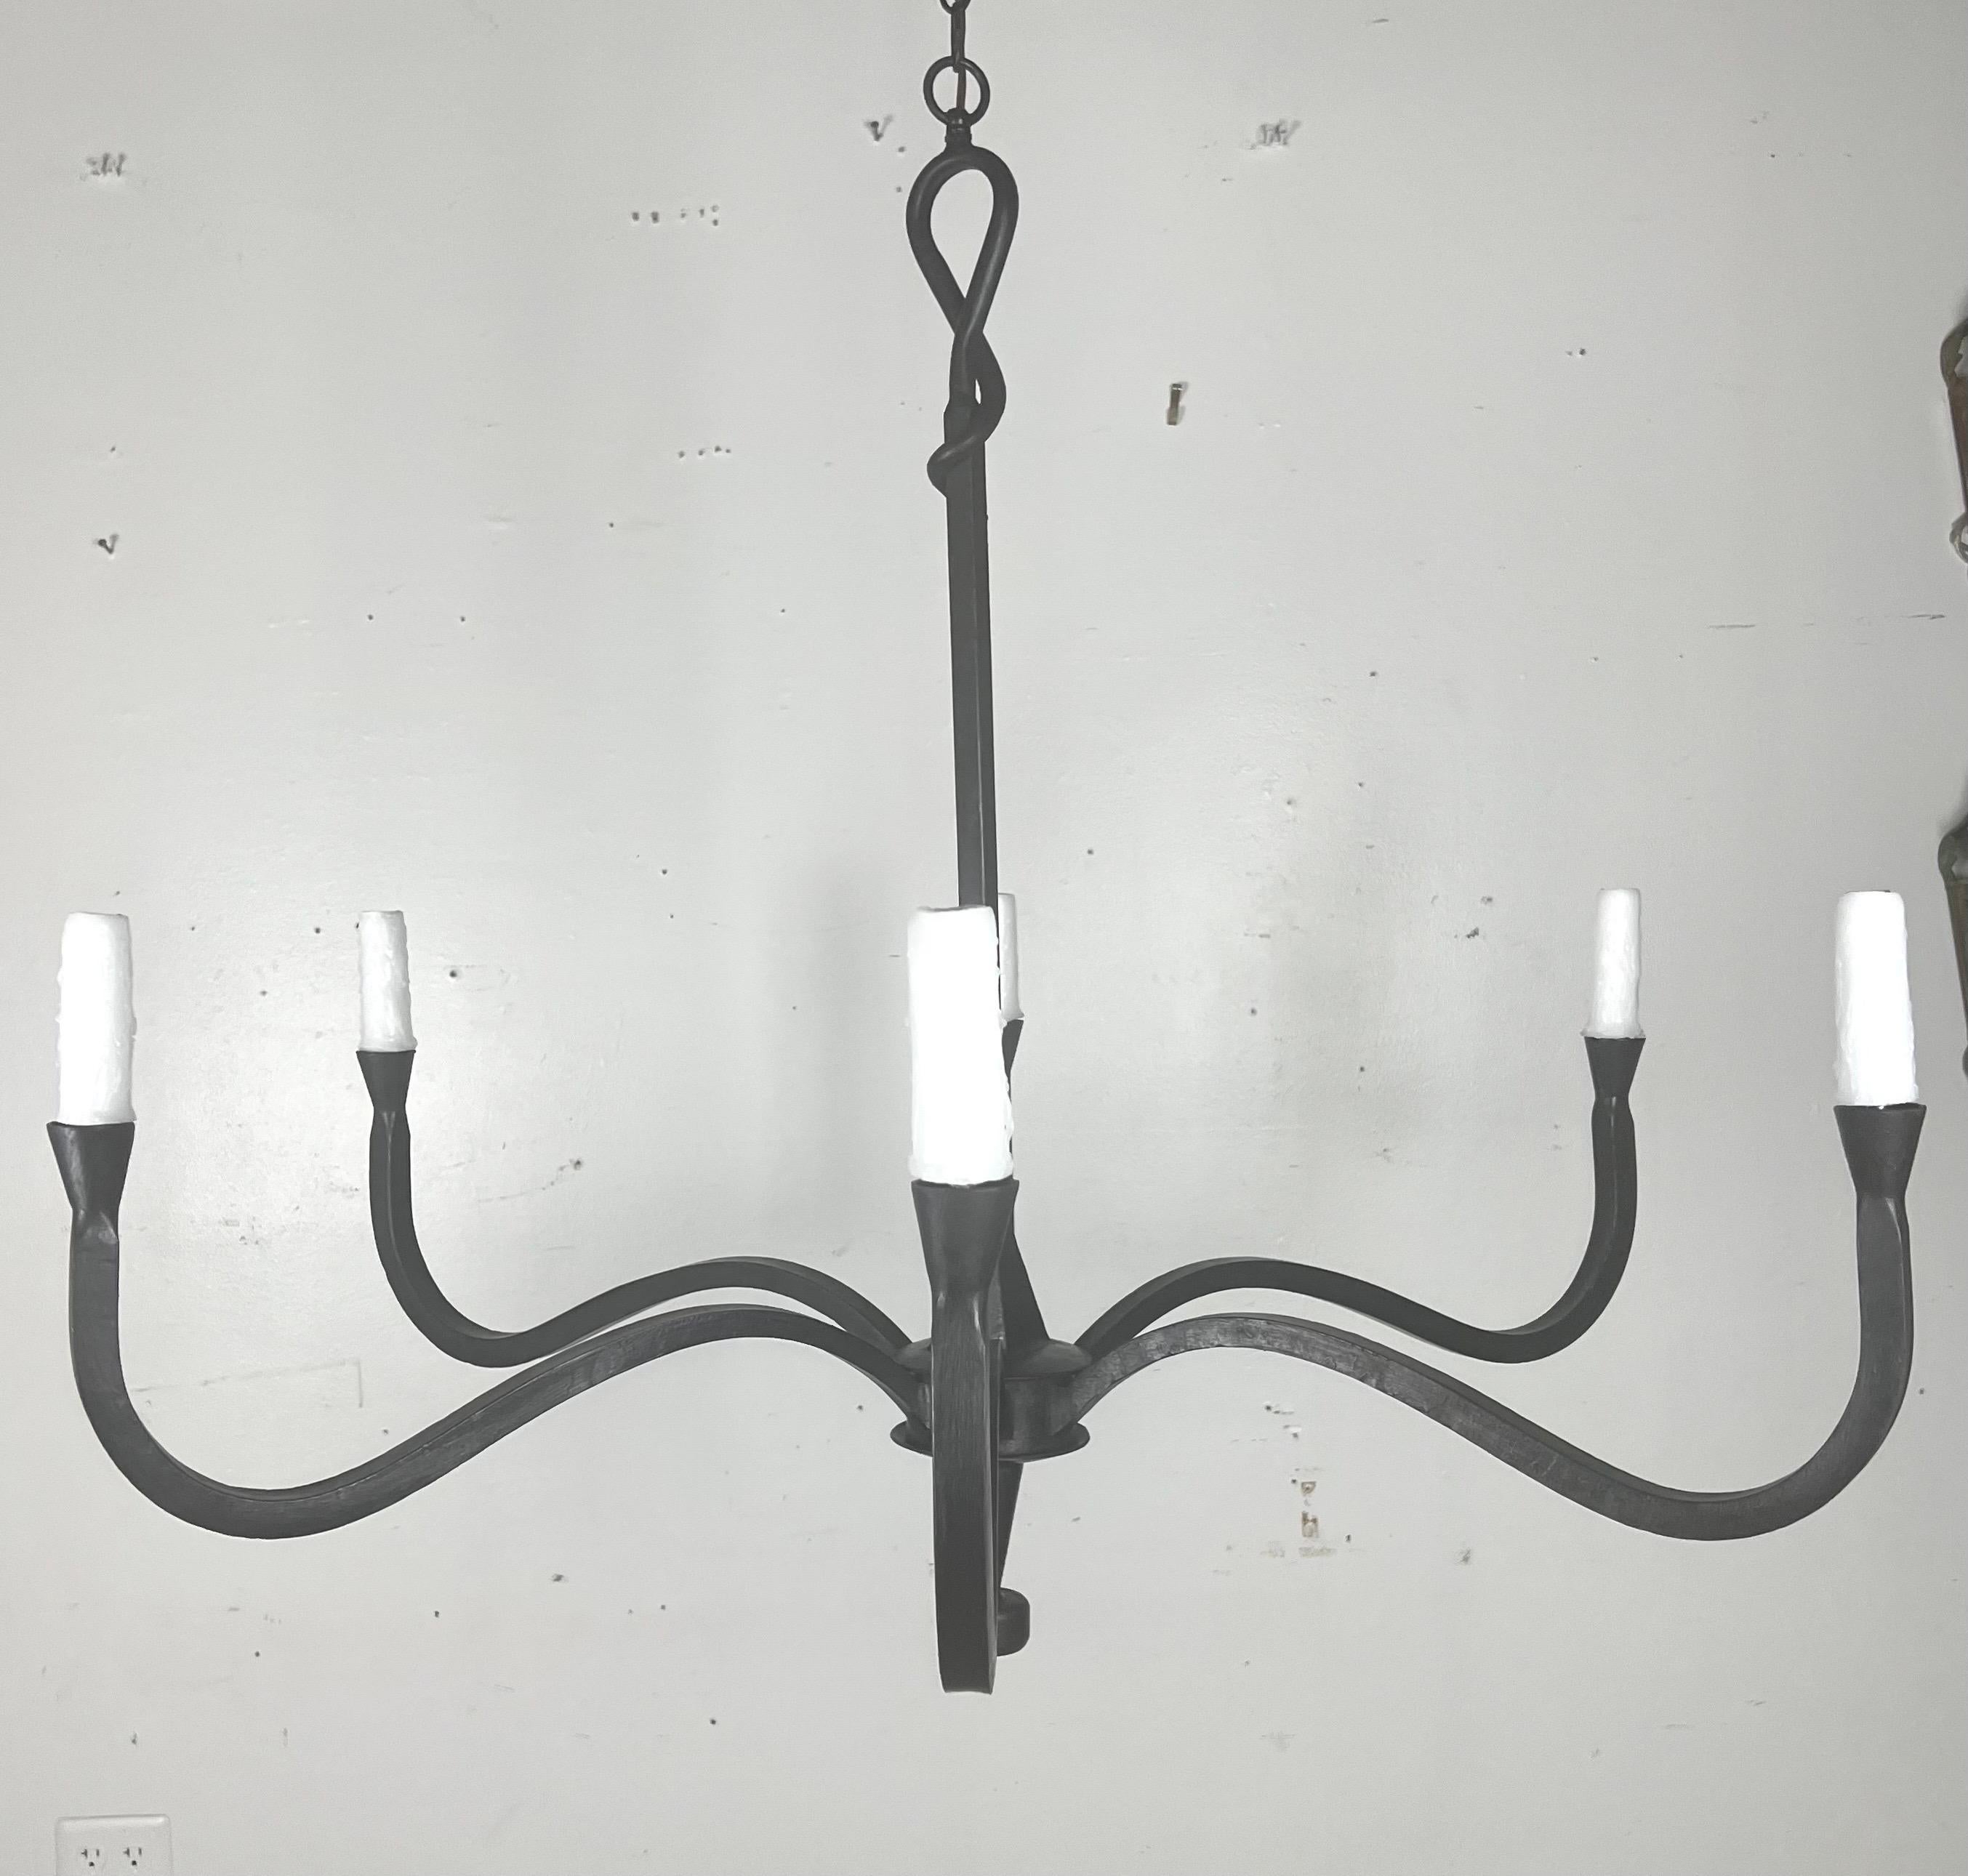 This six light chandelier has a minimalist and elegant design, crafted from wrought iron. It features six arms, extending symmetrically from a center hub, each ending in a drip wax candle cover.  The smooth curves and simple lines contribute to its